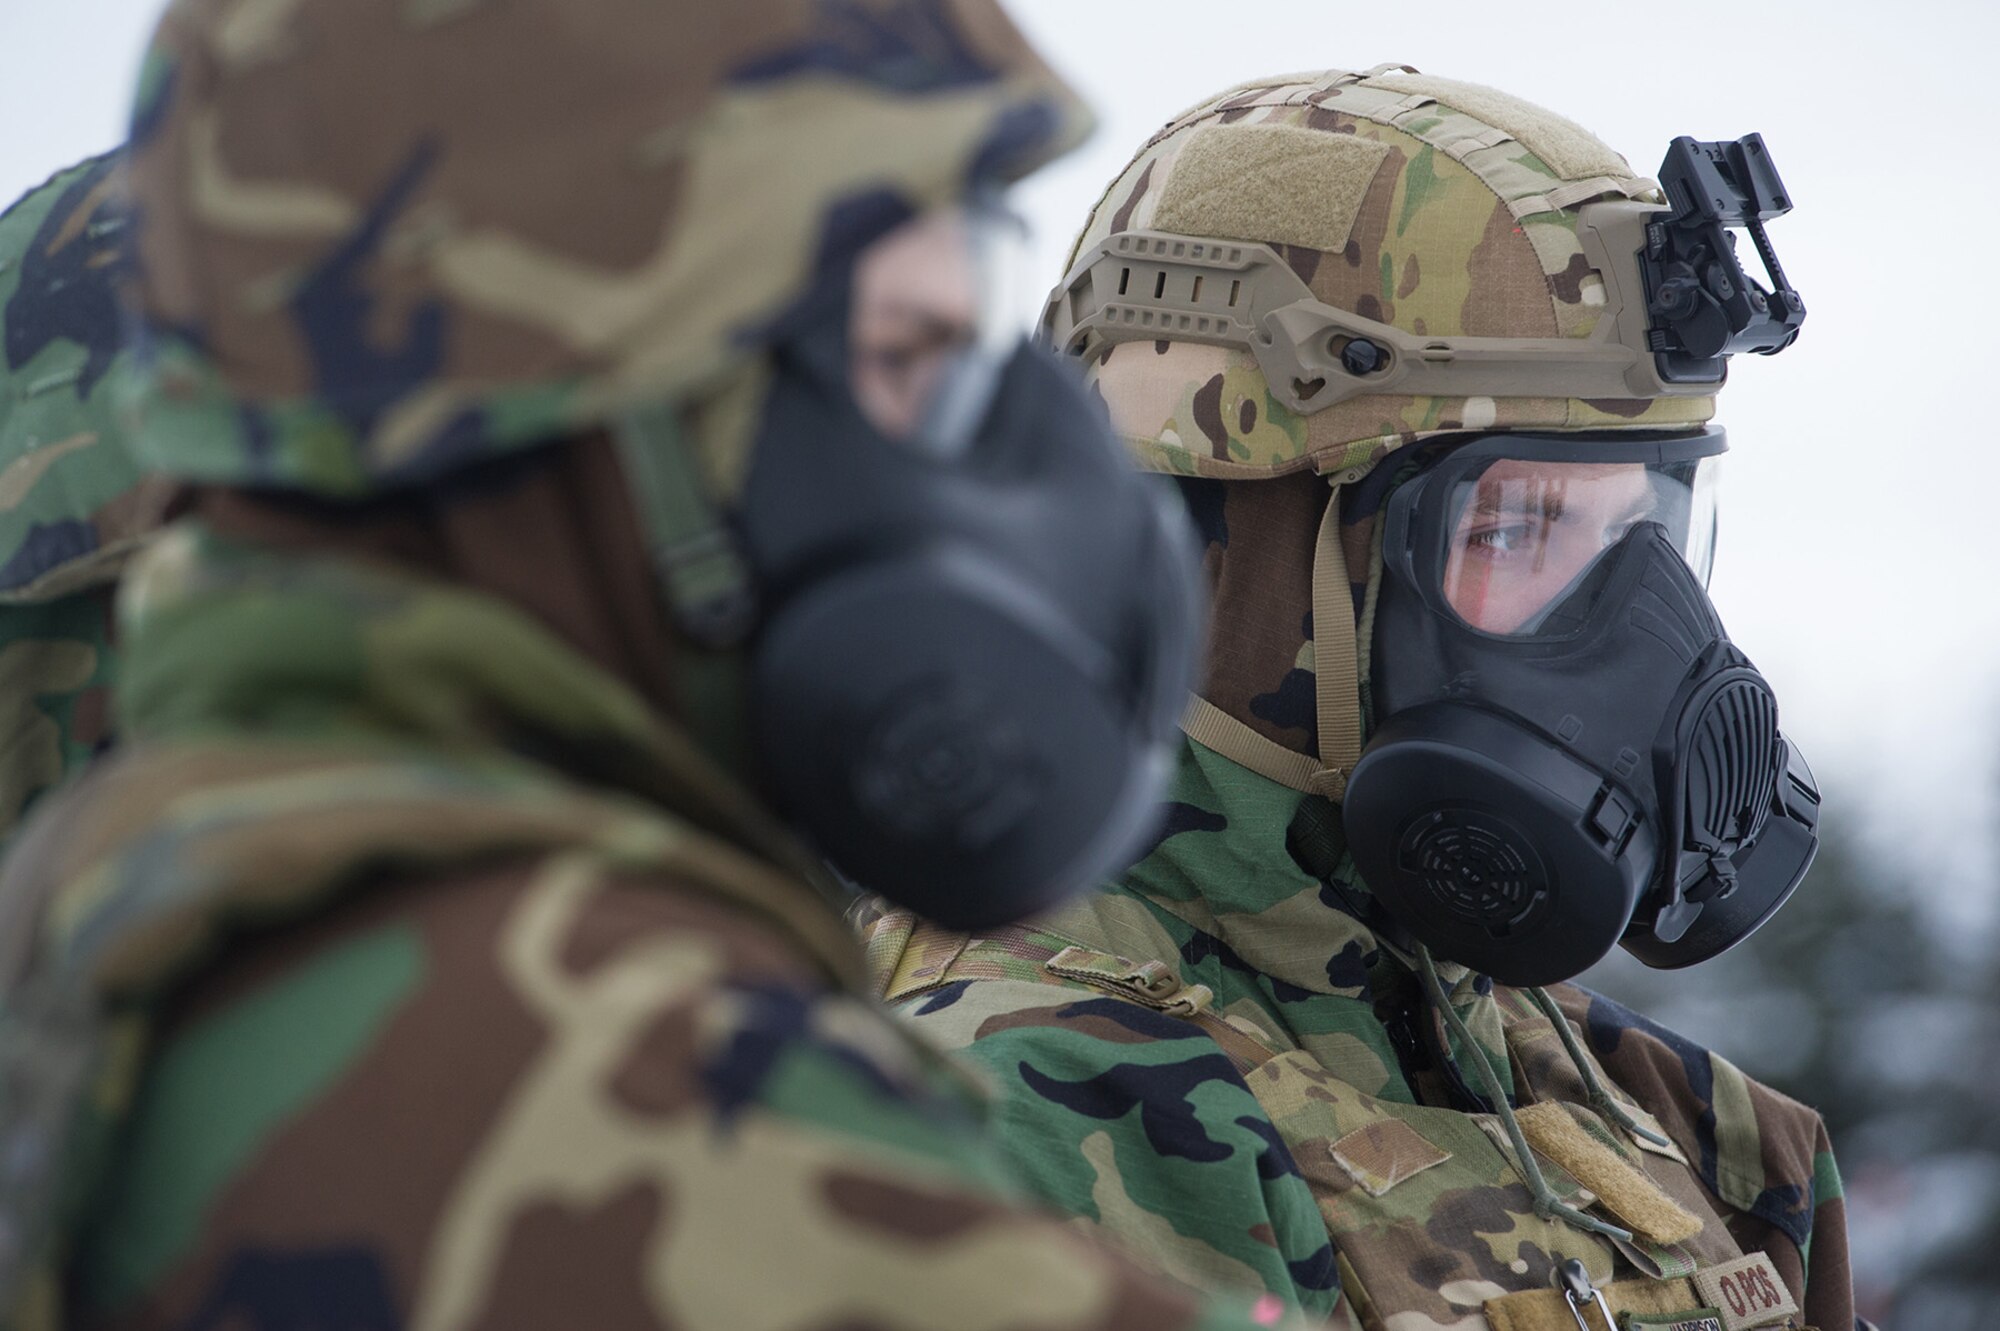 Air Force Capt. Justin Harrison observes Airmen assigned to the 673d Civil Engineer Squadron, Explosives Ordinance Disposal Flight, preparing charges for a live-fire demolitions exercise in Mission Oriented Protective Posture 4 on Joint Base Elmendorf-Richardson, Alaska, Feb.14, 2018.  The Airmen were conducting EOD training in a simulated chemical weapons contaminated environment.